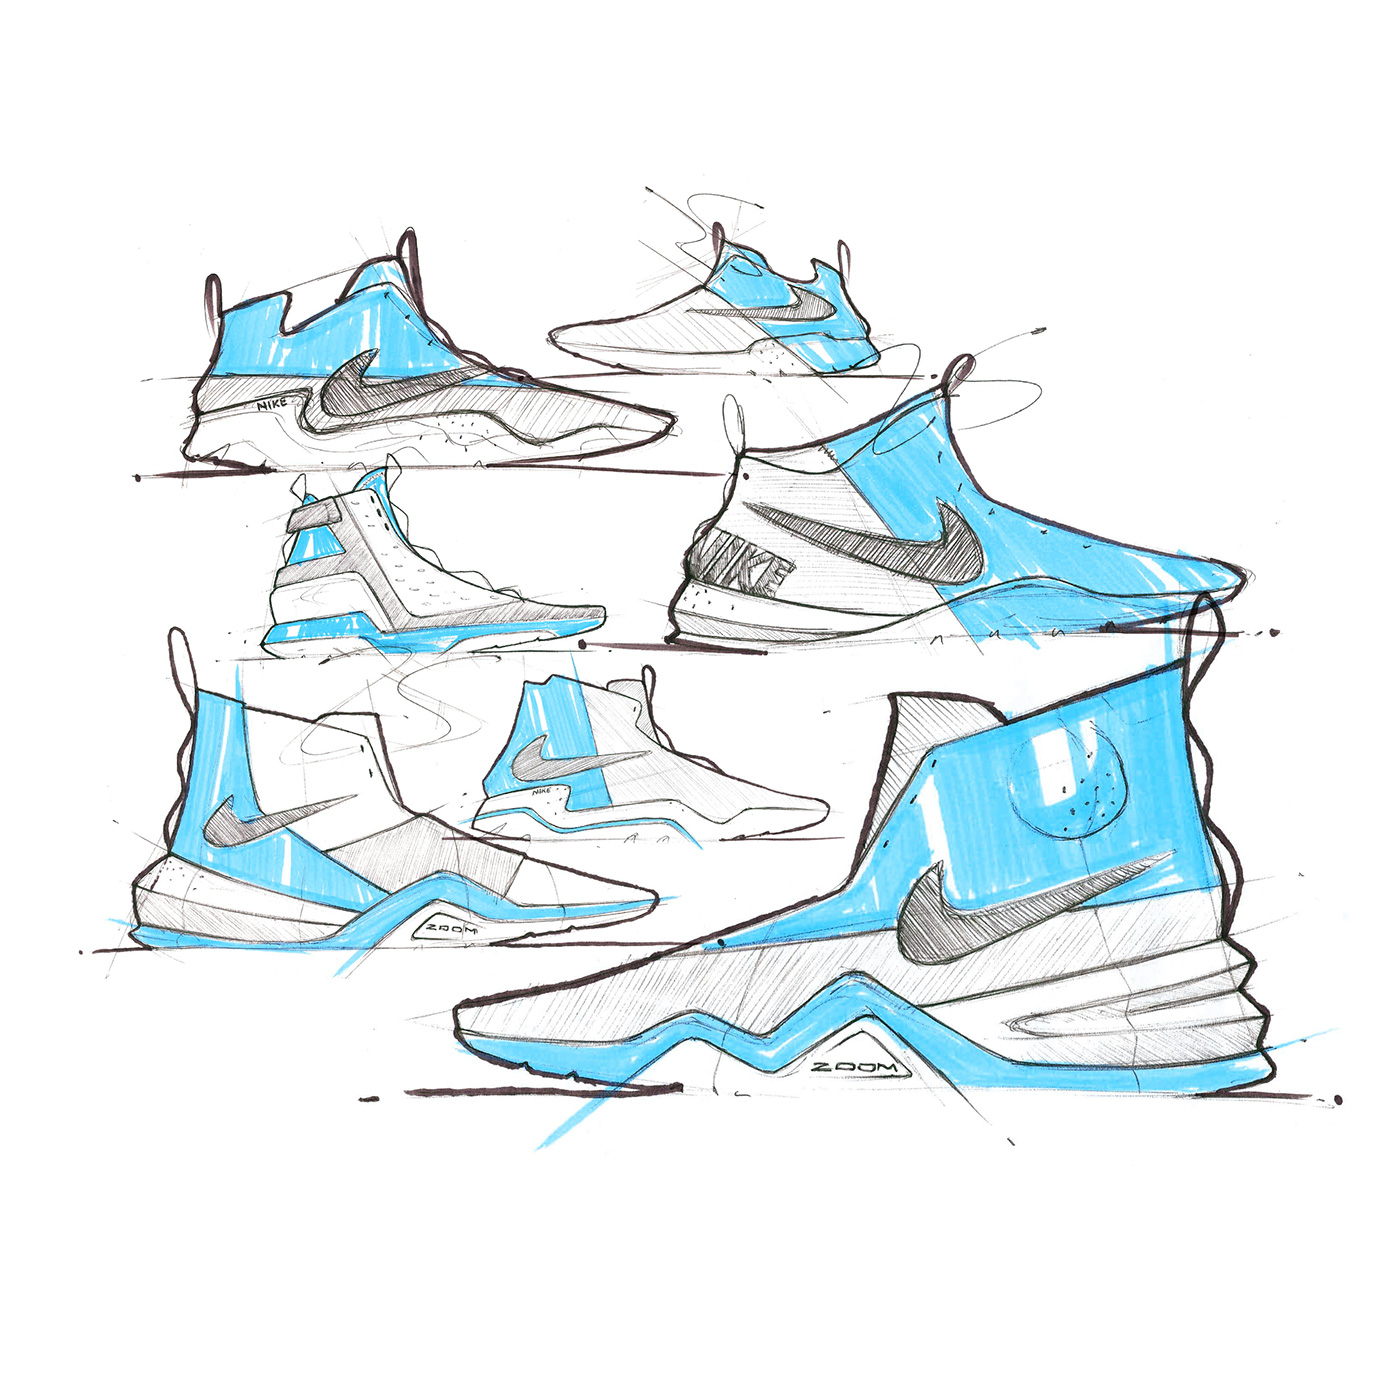 sketch sketchbook photoshop pen pencil Nike adidas New Balance shoes sneakers